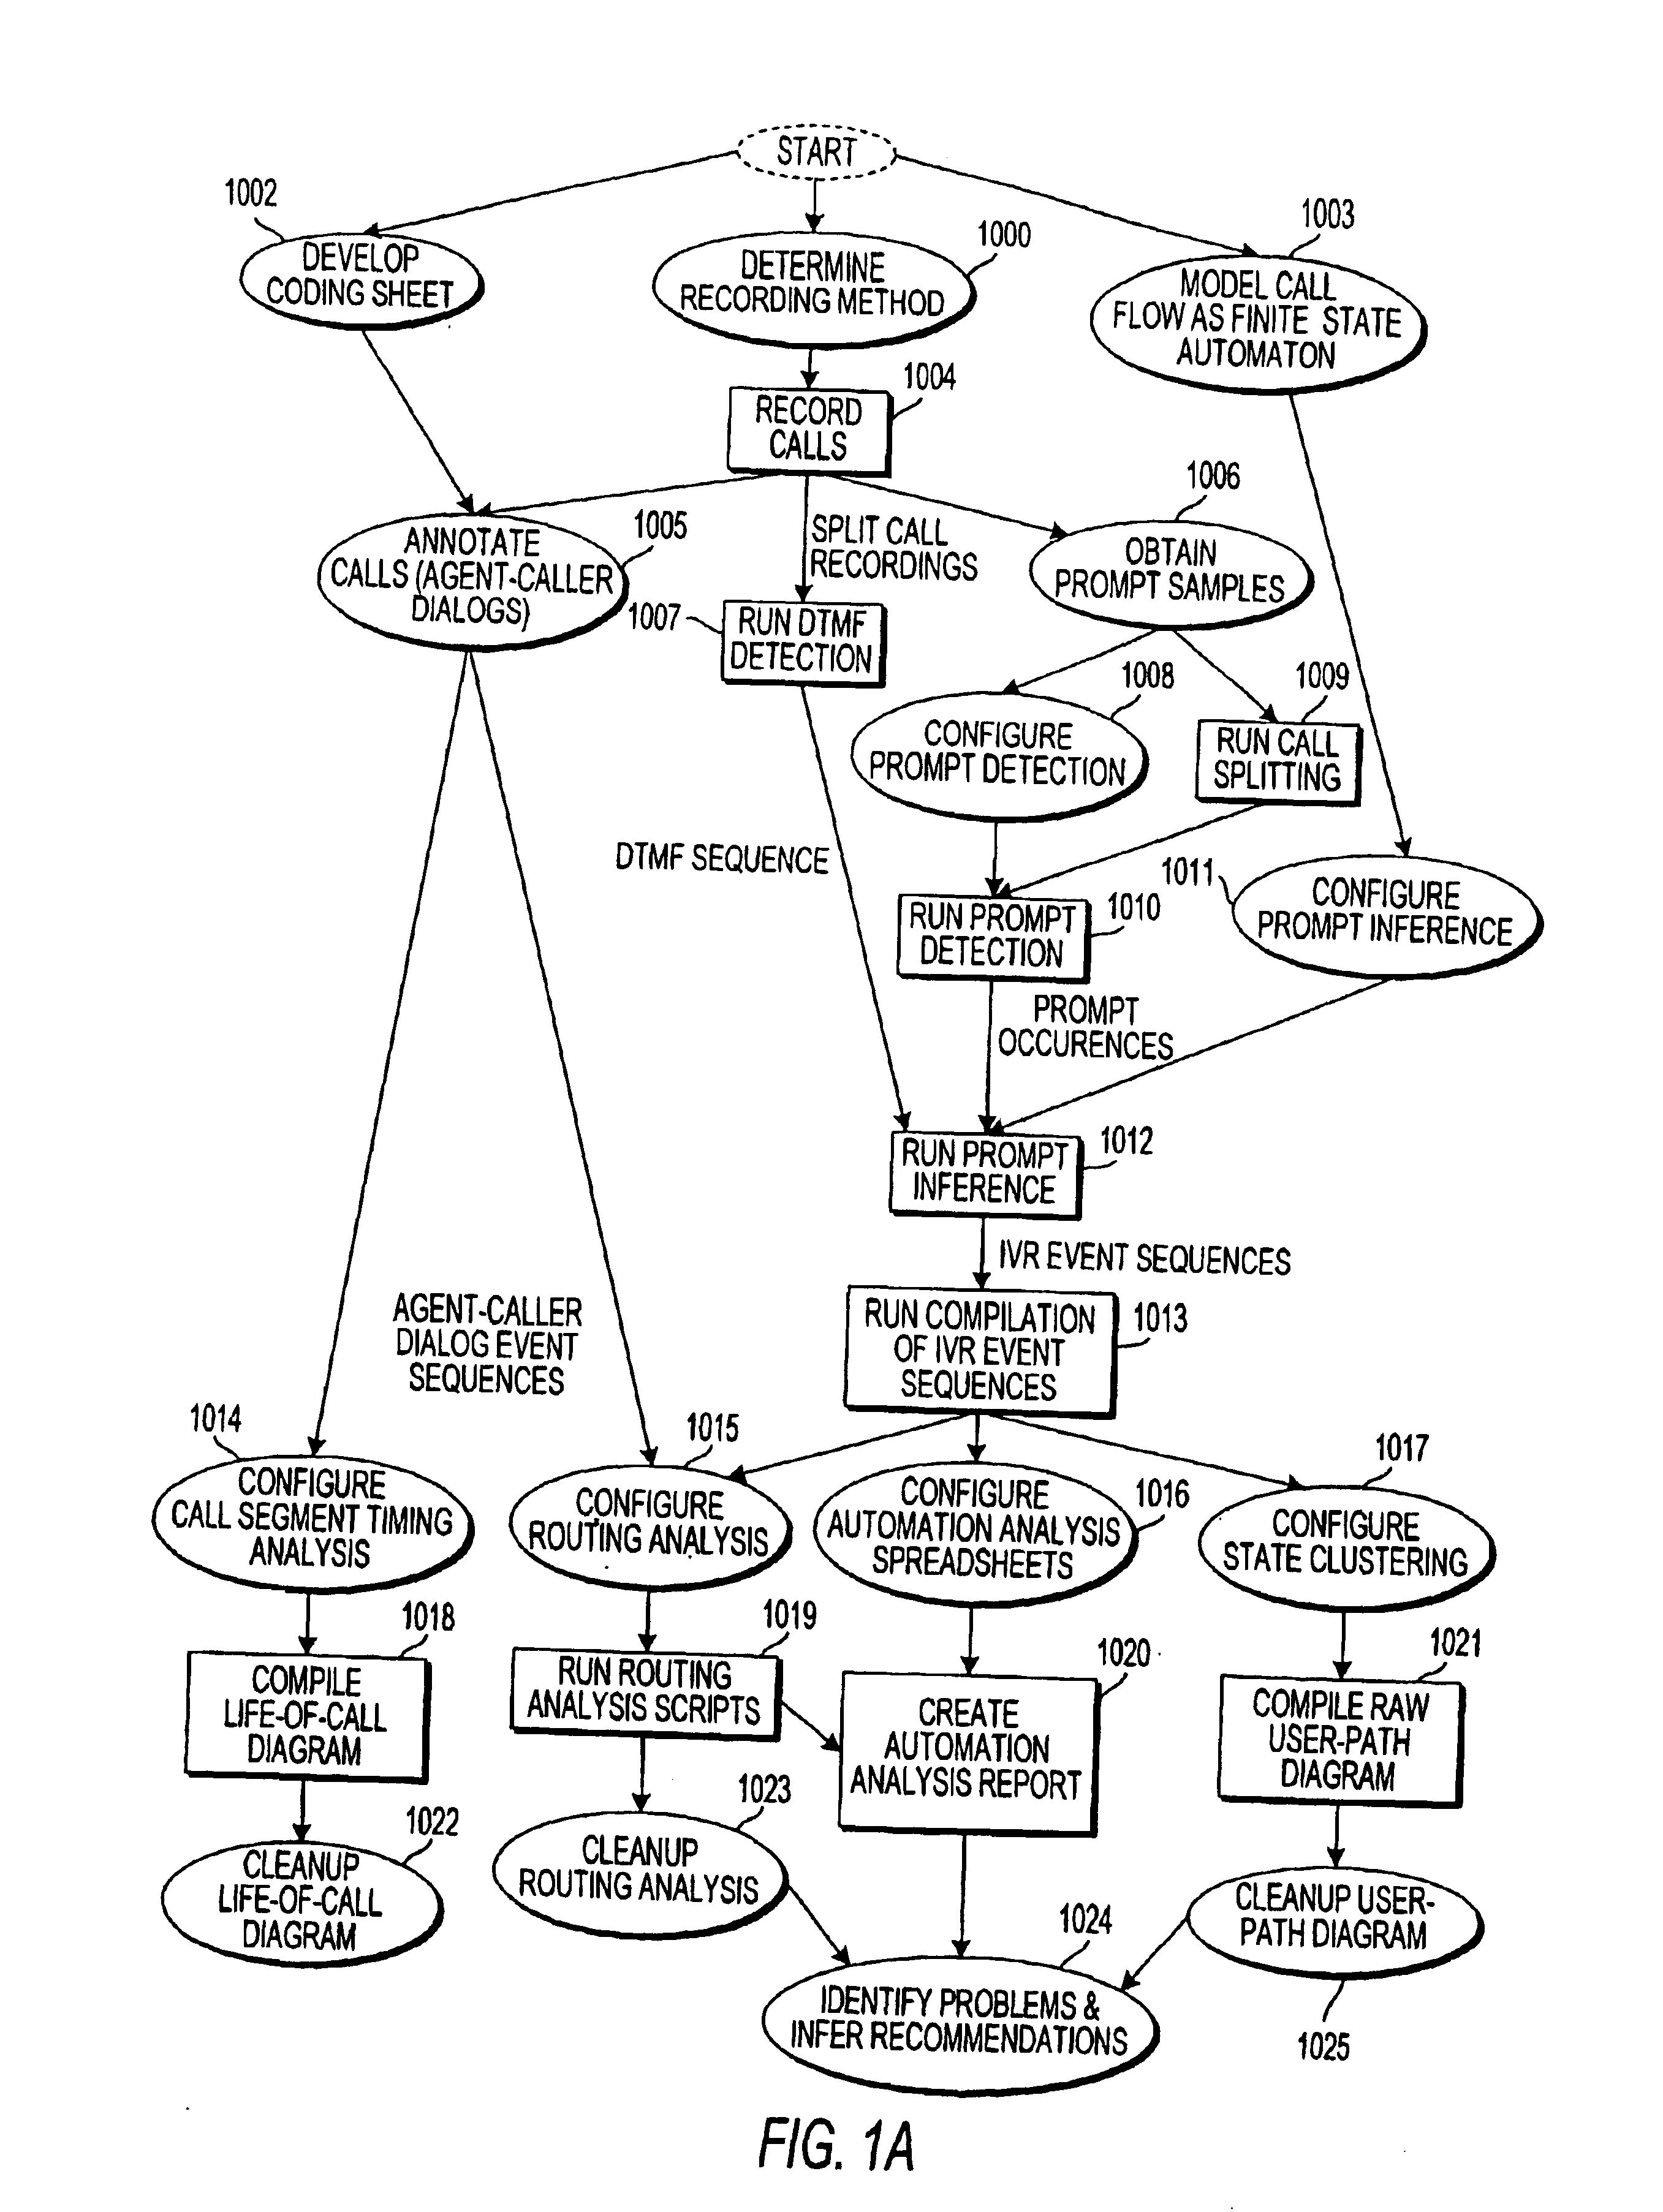 Apparatus and method for logging events that occur when interacting with an automated call center system